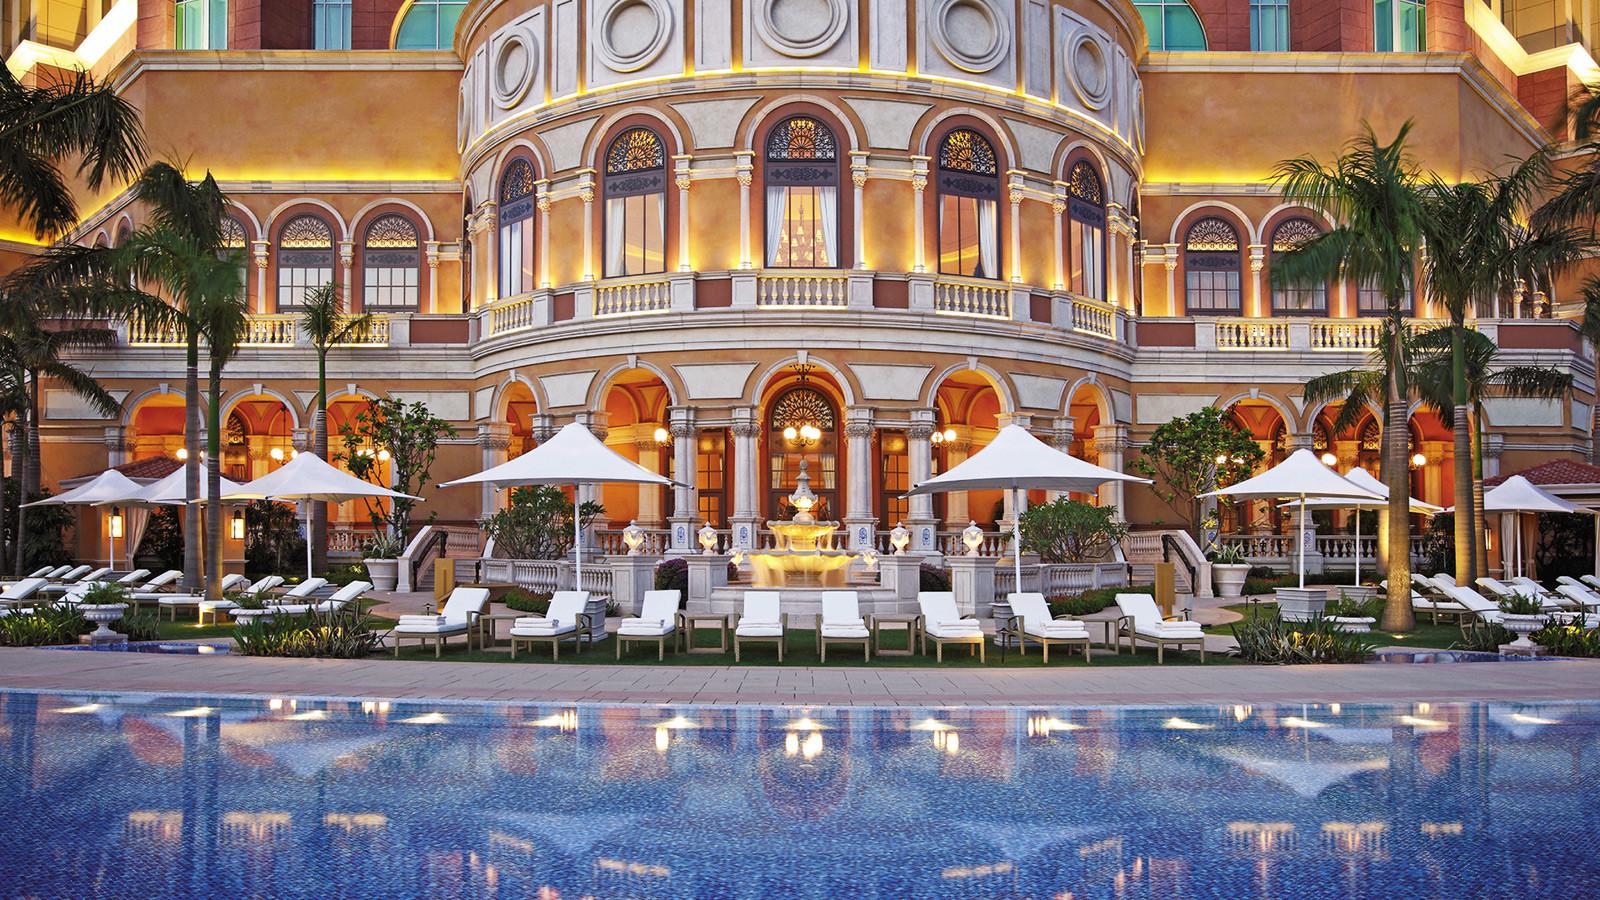 news-main-four-seasons-hotel-macao-named-among-chinas-top-50-hotels-by-voyage-magazine.1578137036.jpg